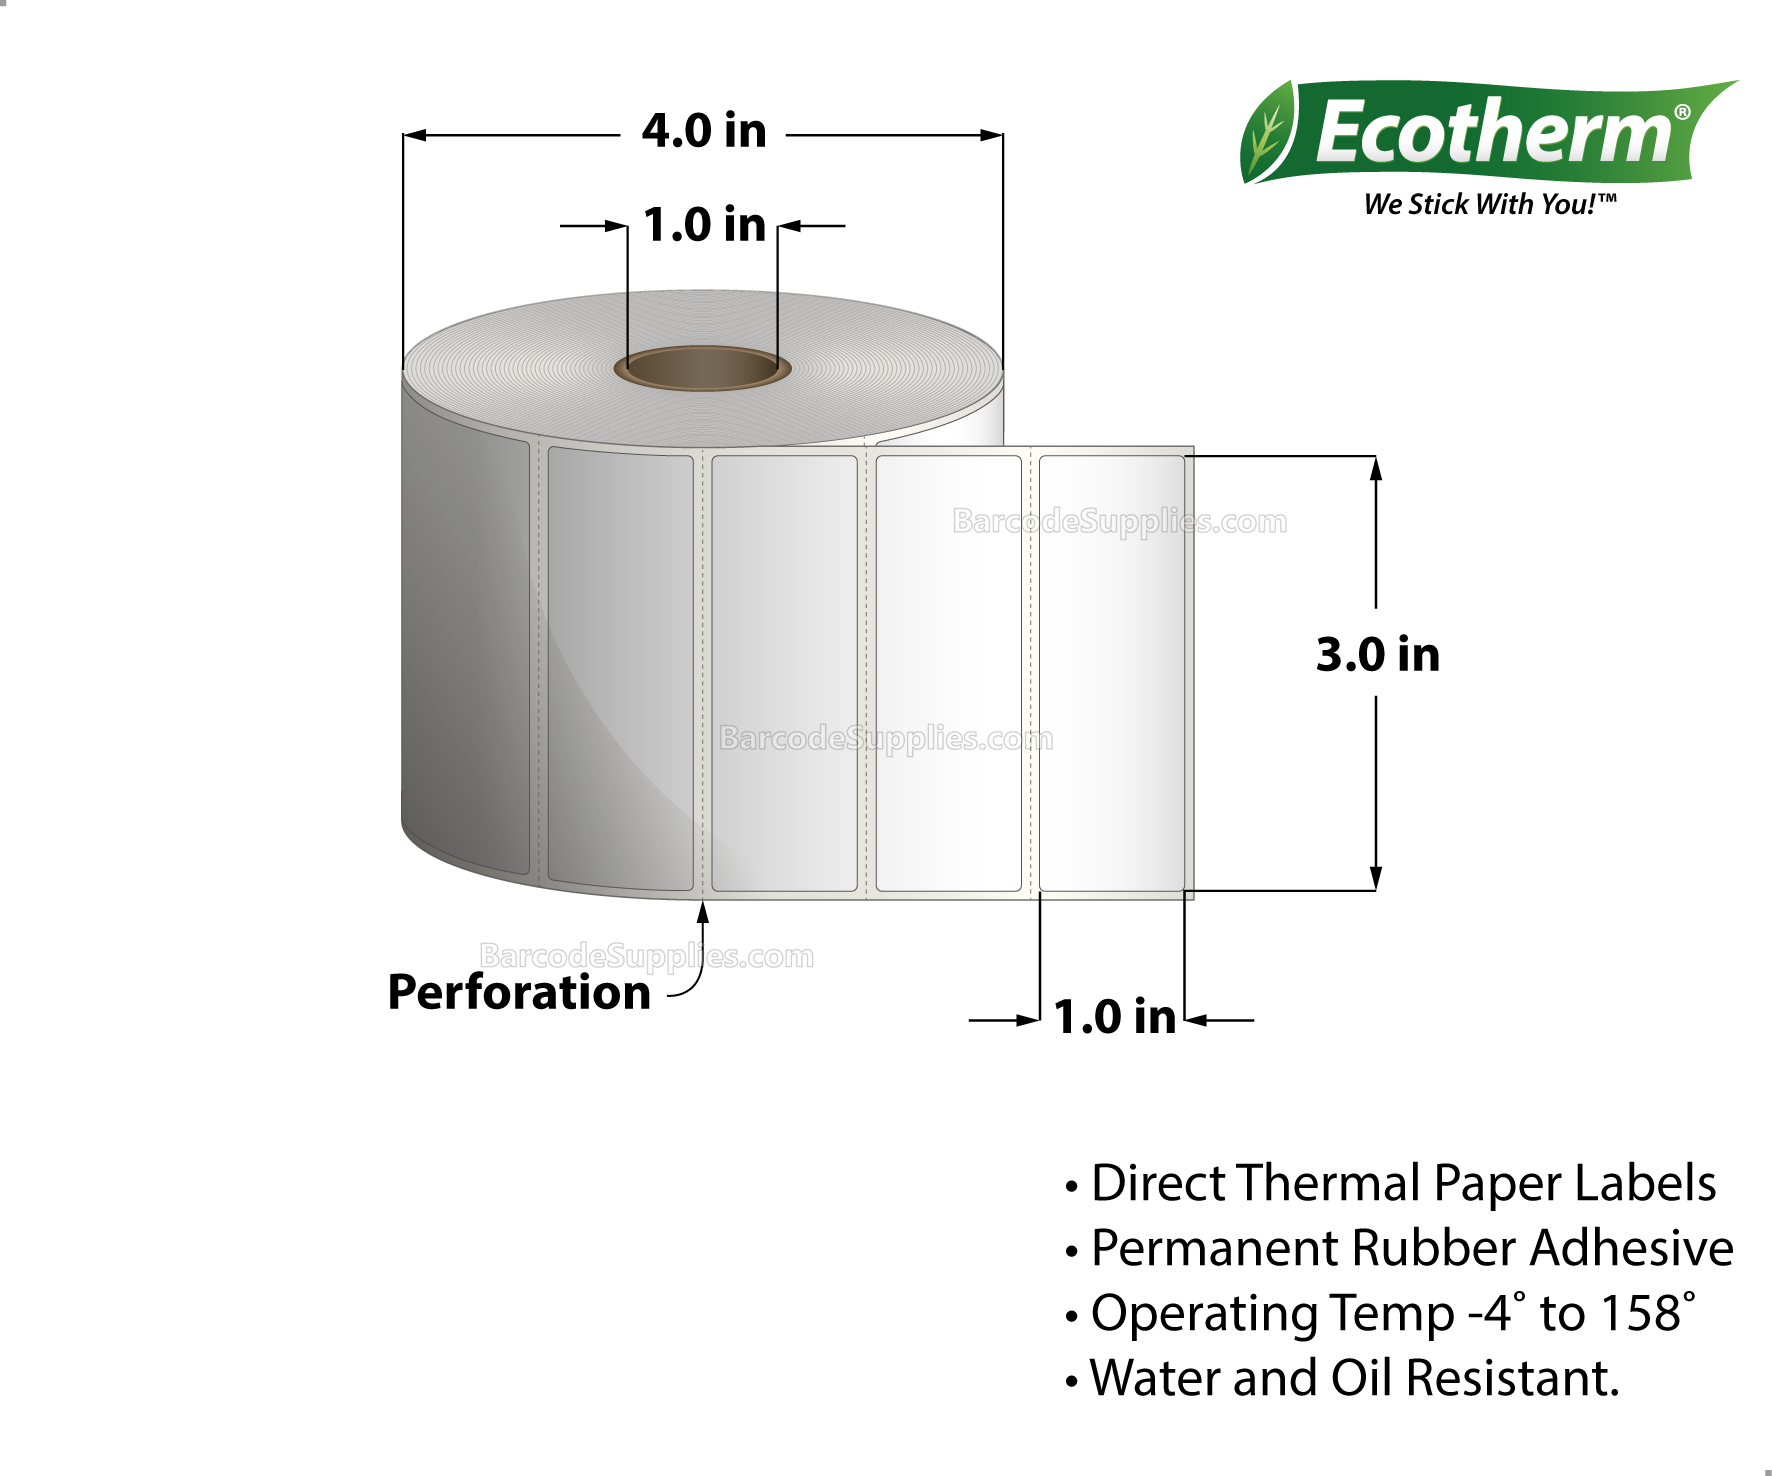 3 x 1 Direct Thermal White Labels With Rubber Adhesive - Perforated - 1310 Labels Per Roll - Carton Of 4 Rolls - 5240 Labels Total - MPN: ECOTHERM14108-4